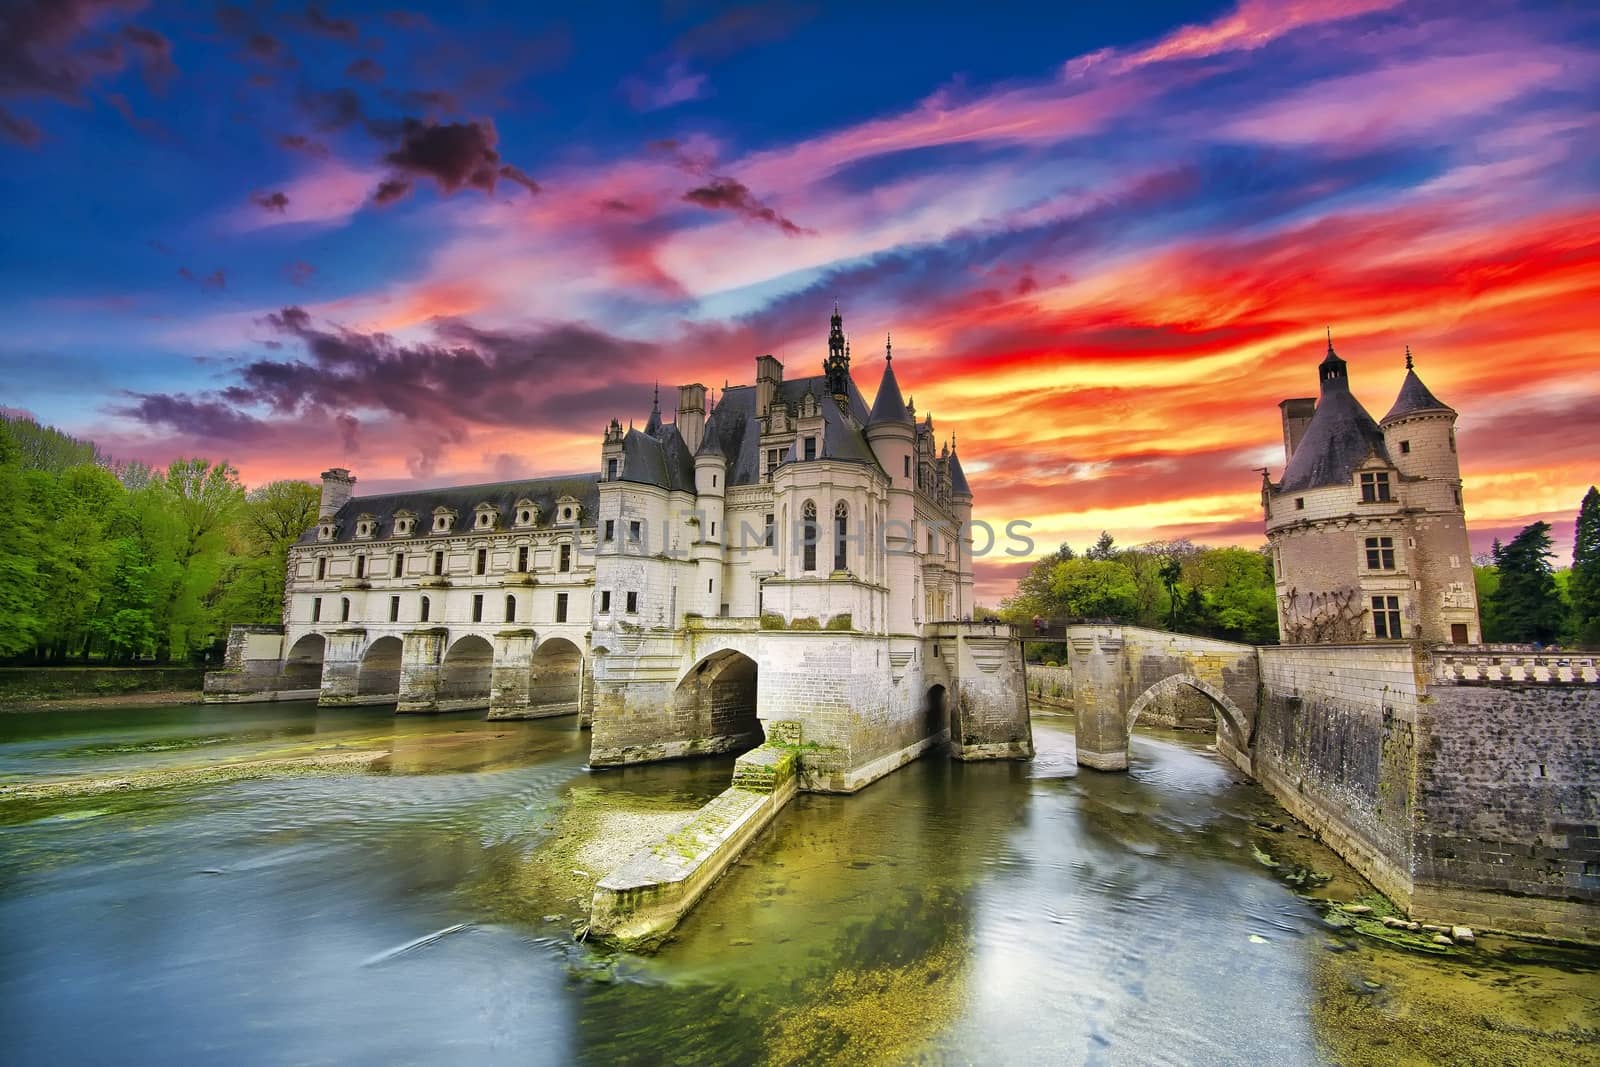 Beautiful Chateau de Chenonceau at dusk over the river Cher, Loire Valley, France. by CreativePhotoSpain